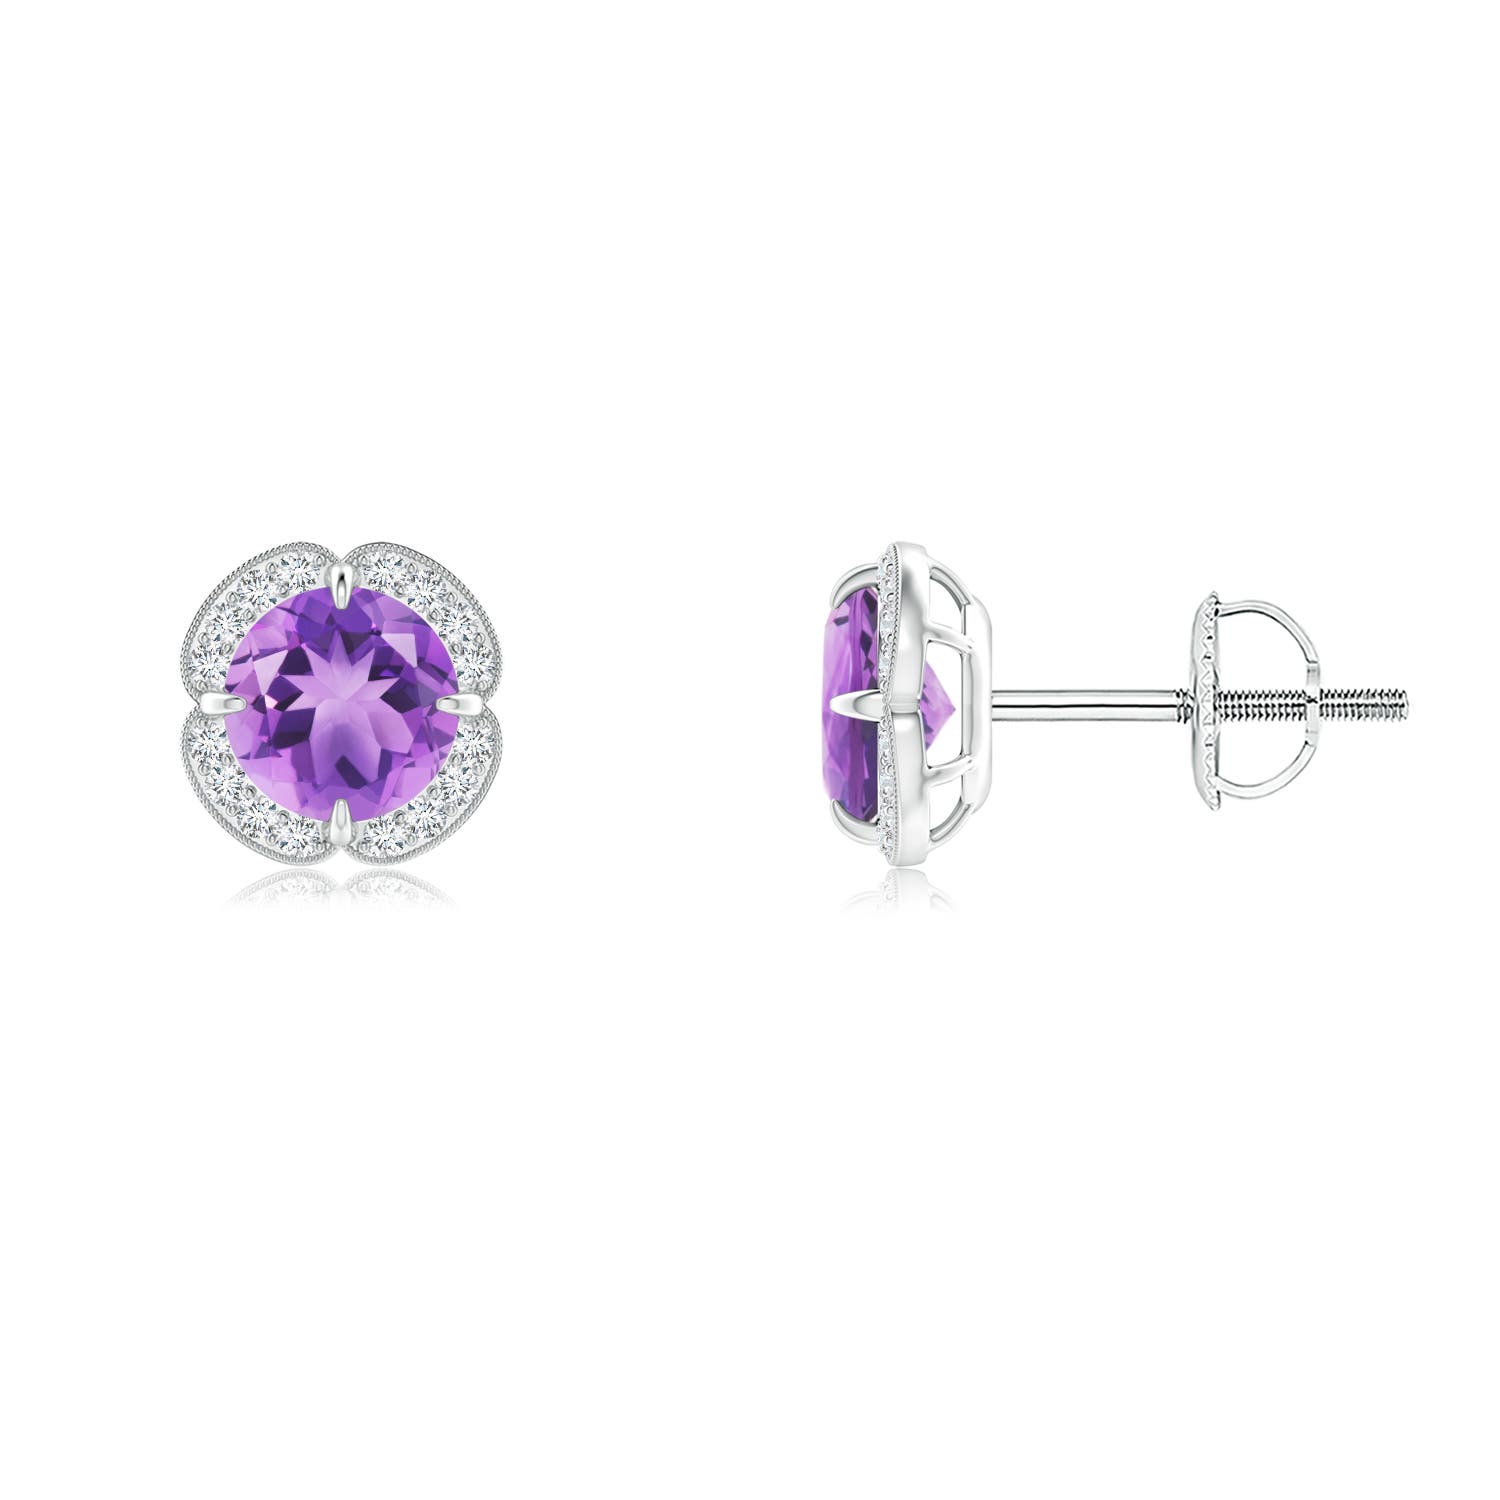 A - Amethyst / 1.01 CT / 14 KT White Gold